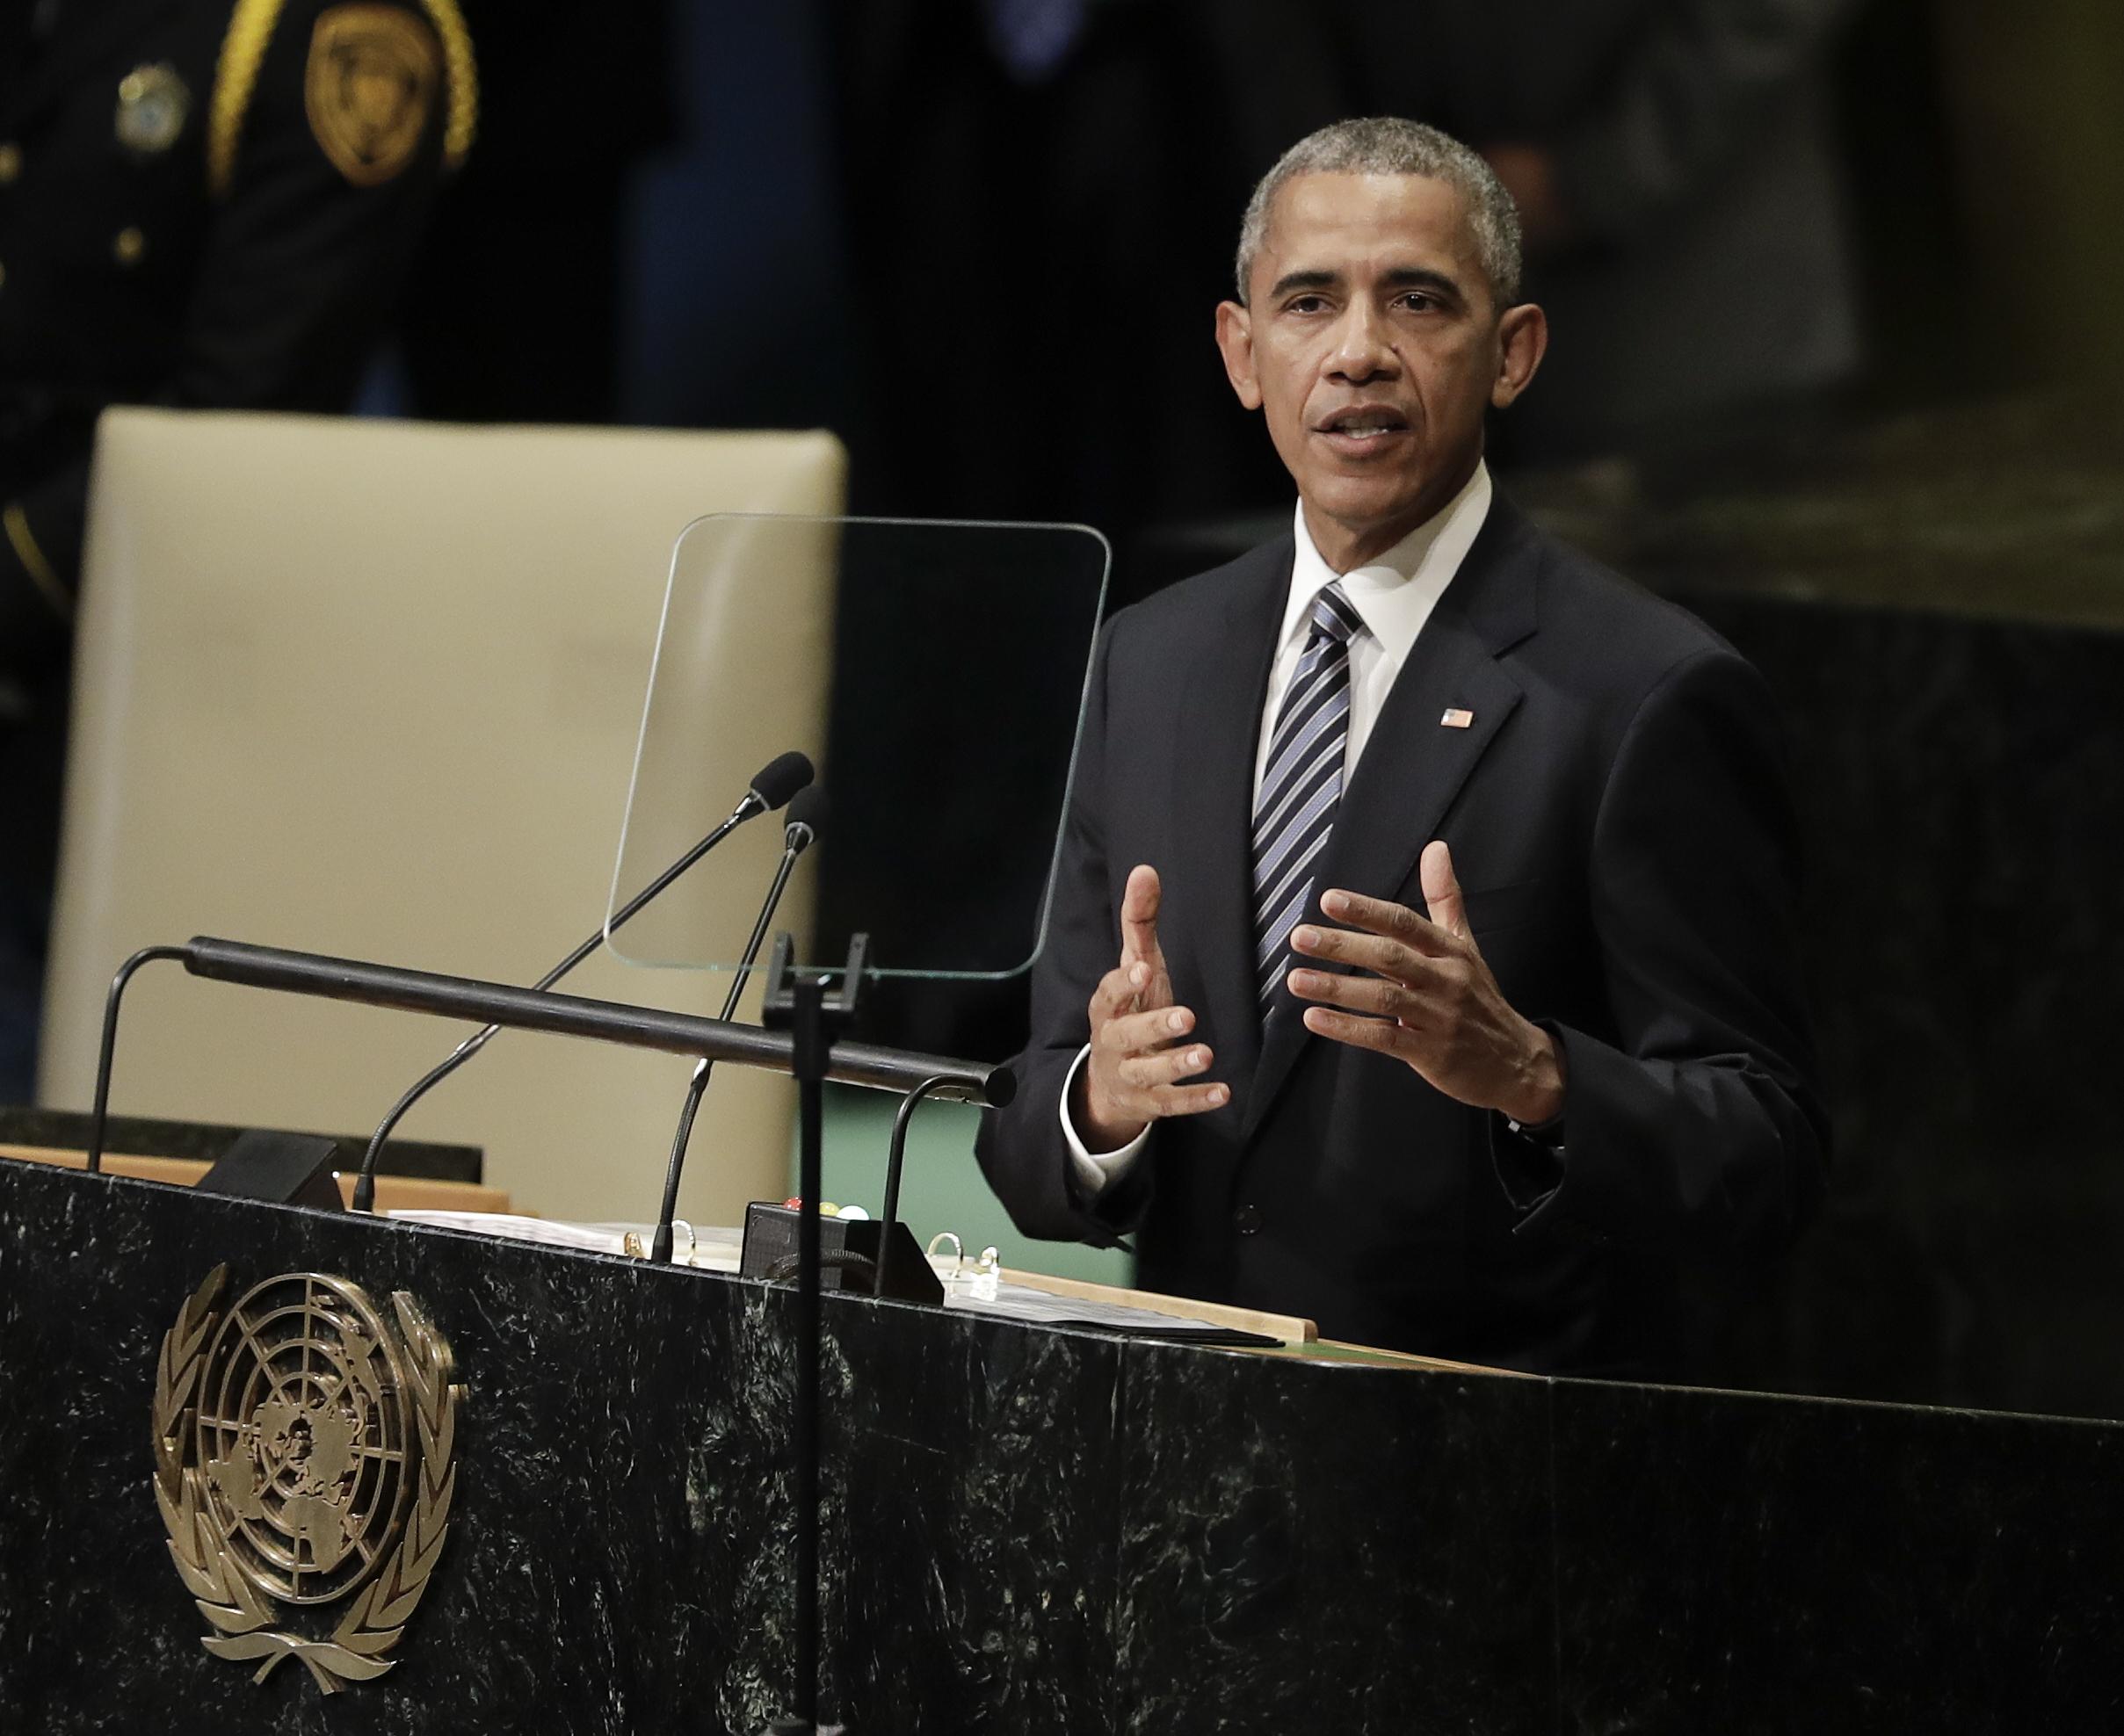 Barack Obama addresses the United Nations General Assembly for the final time